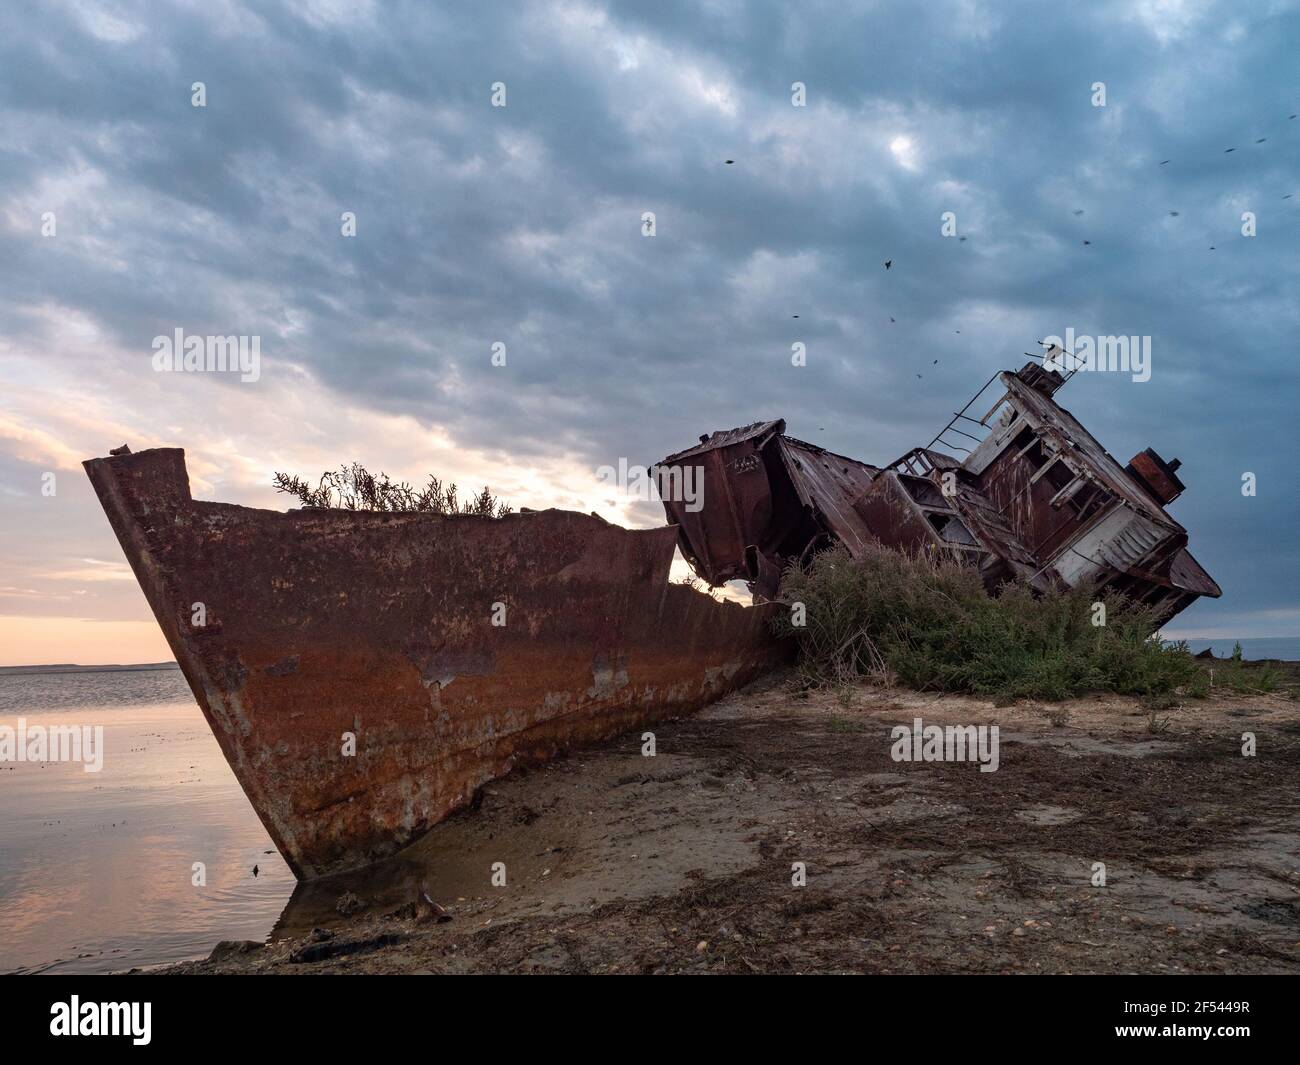 A close-up of an old abandoned ship on the shores of the drying up Aral Sea. Kazakhstan. The ship was sawn for scrap by local residents. Ecological di Stock Photo